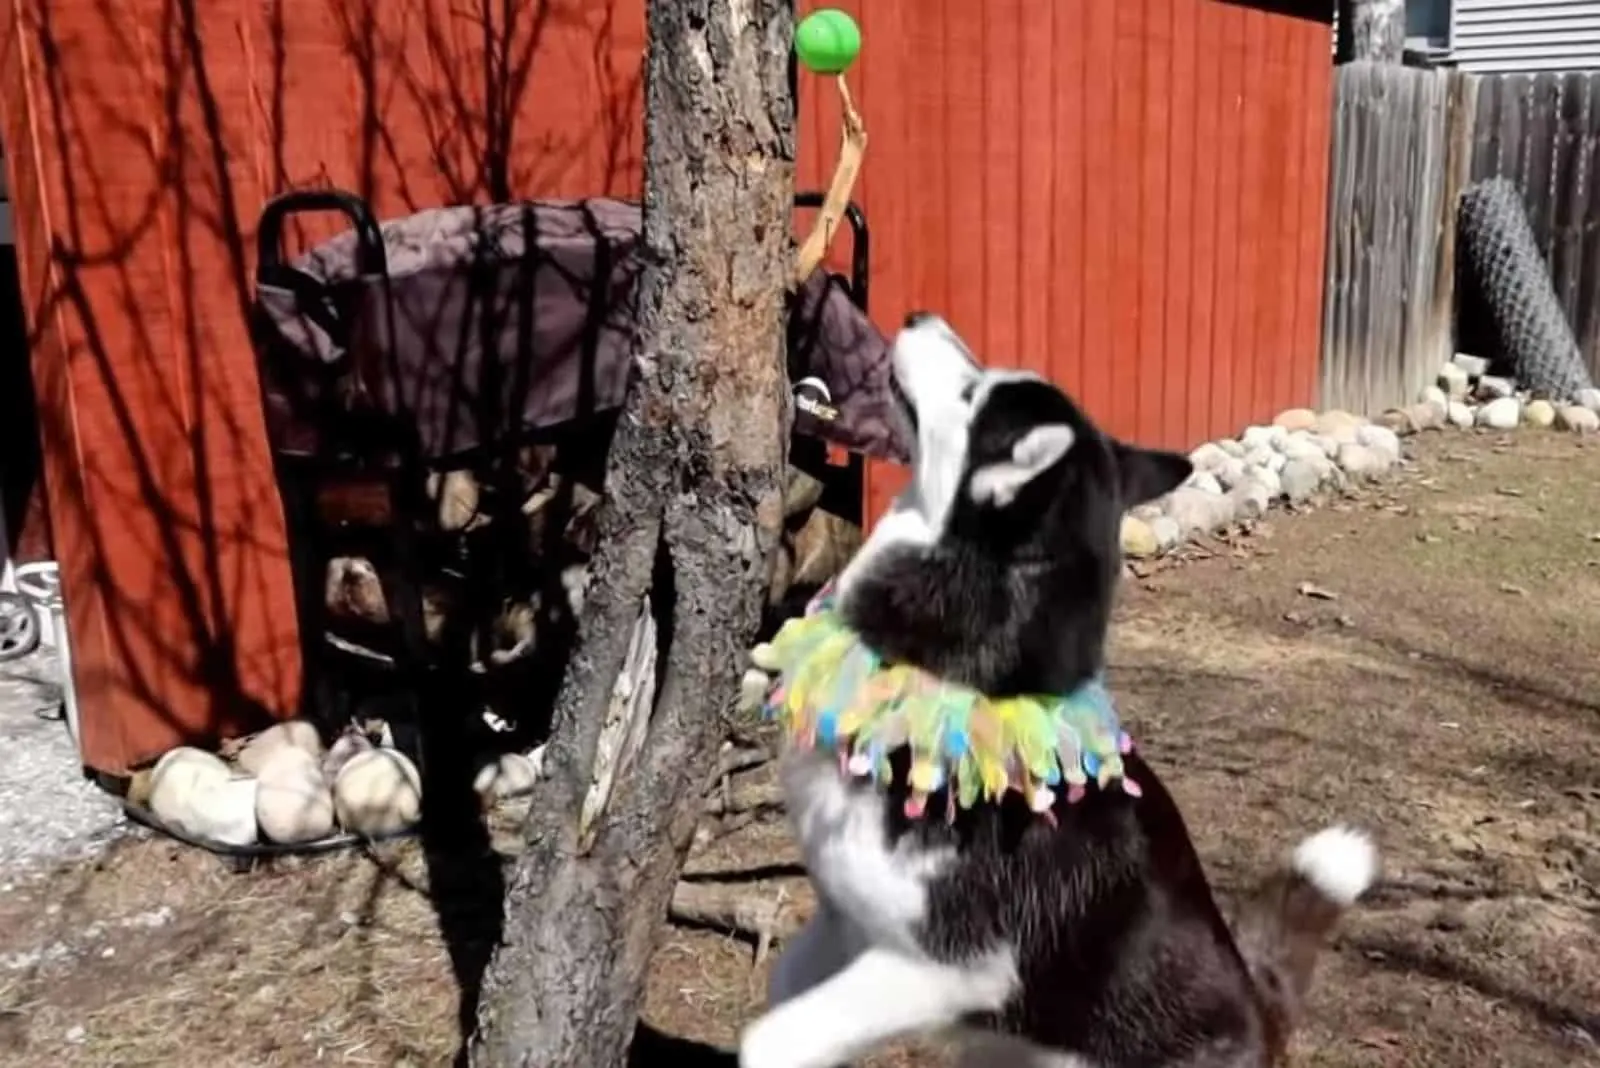 the husky is looking at the Easter egg on the tree